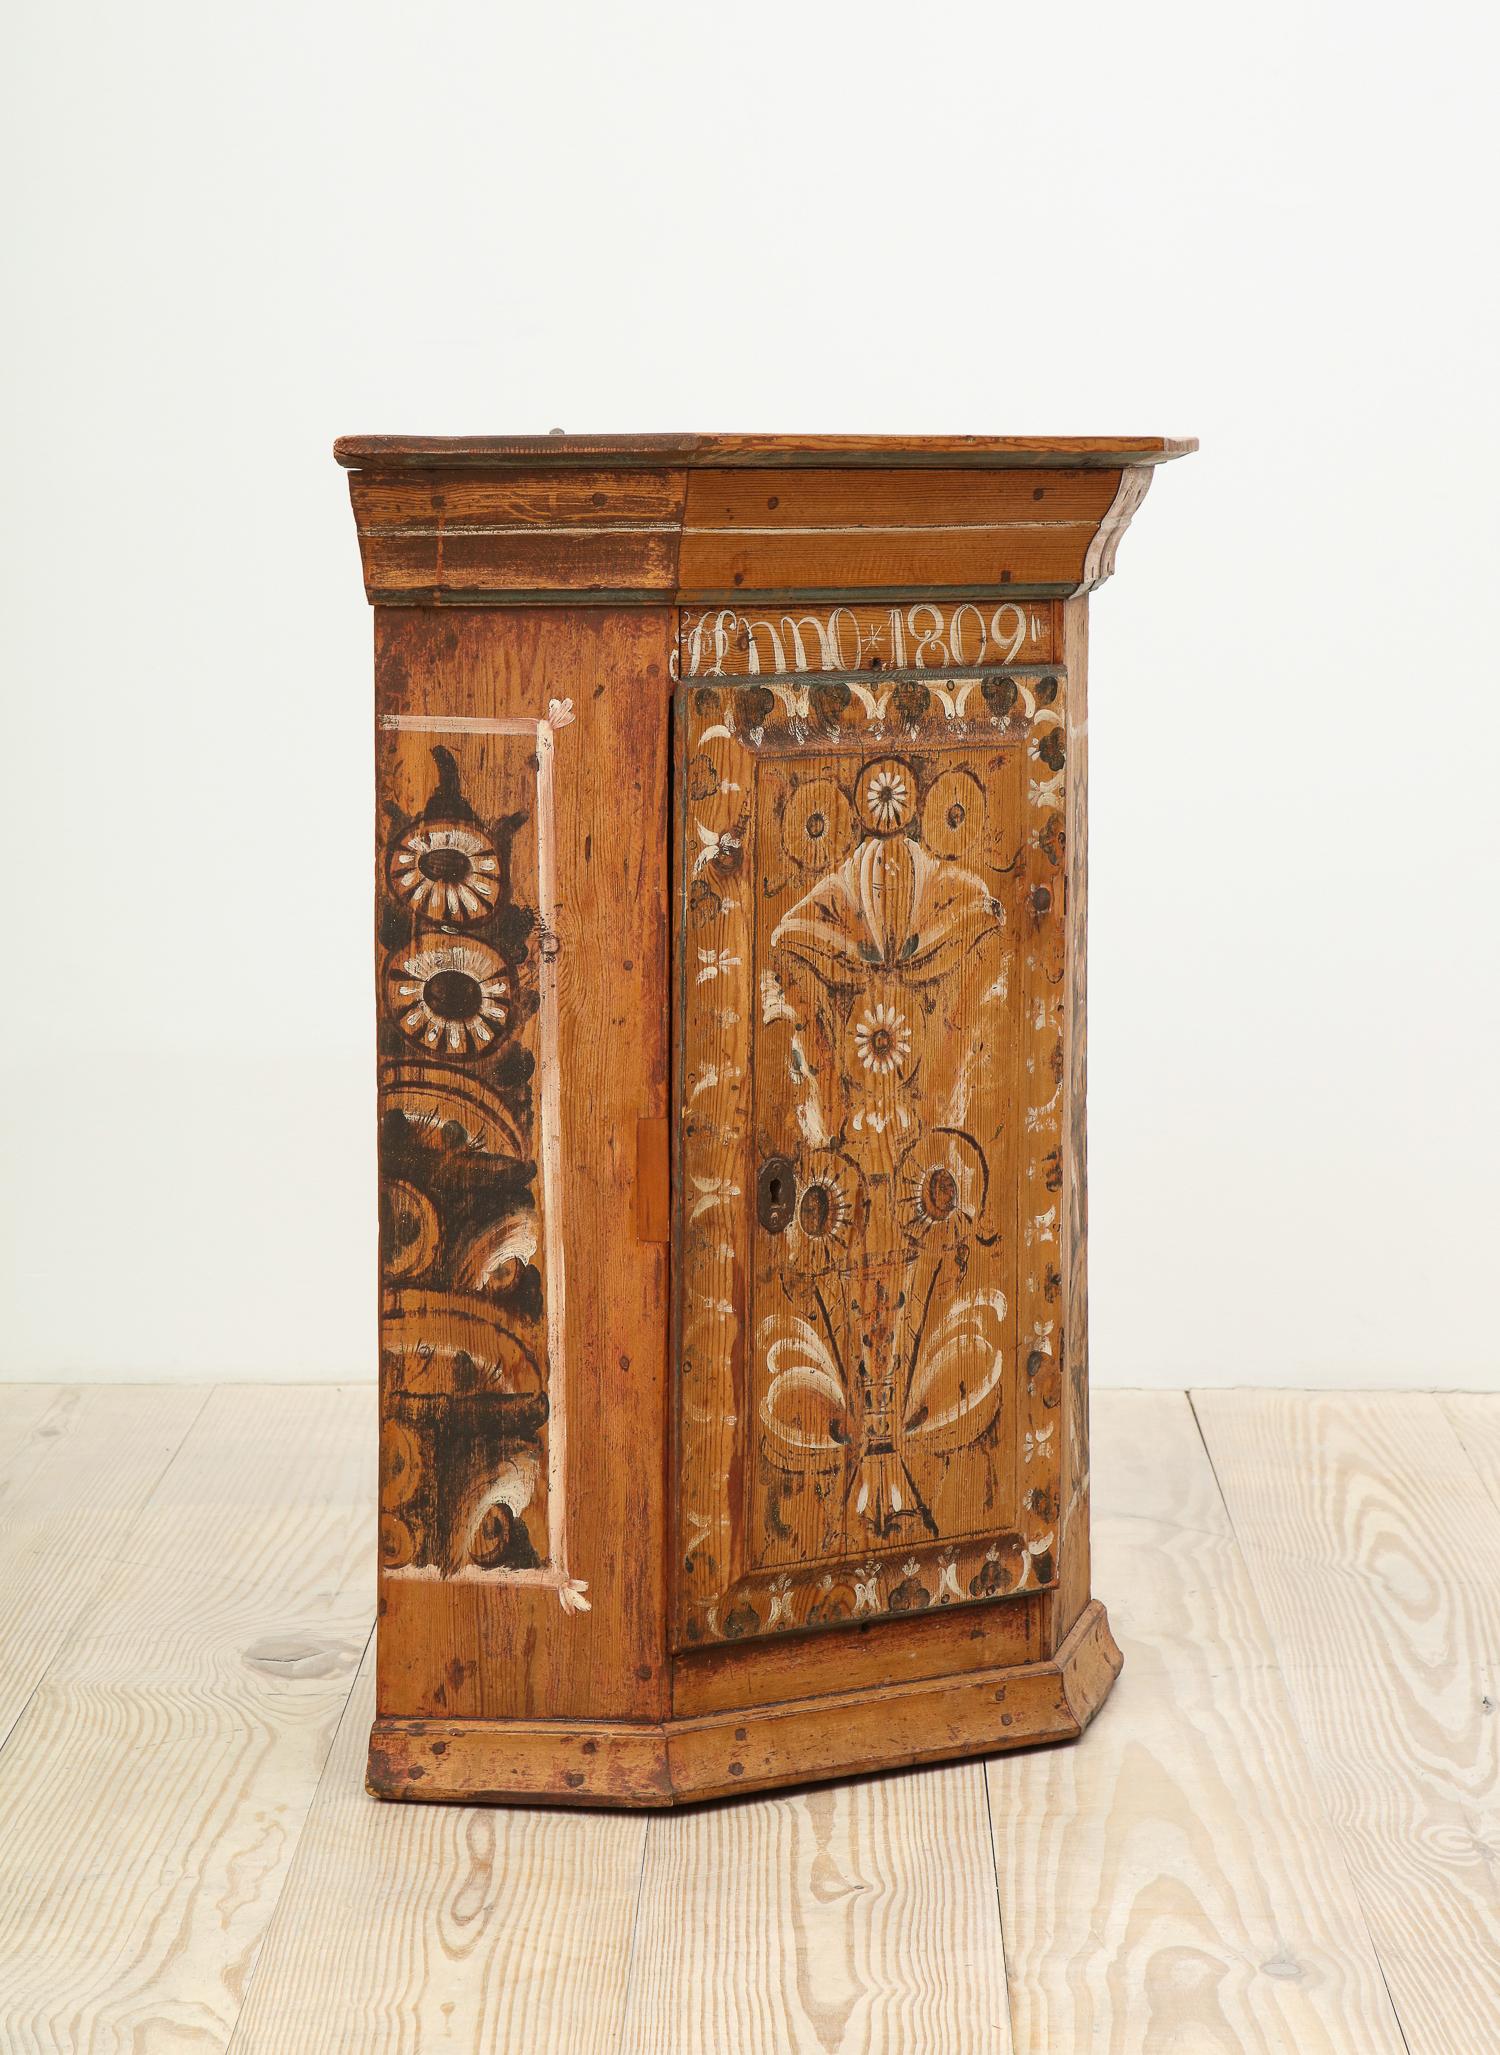 Exceptional 19th century Swedish Dalarna Allmoge corner cabinet painted with Kurbits / Rosemaling with center door, Dalarna, Sweden, inscribed and dated: Anno 1830; all original painting.

This corner cabinet, dated 1830, reflects the beautiful,